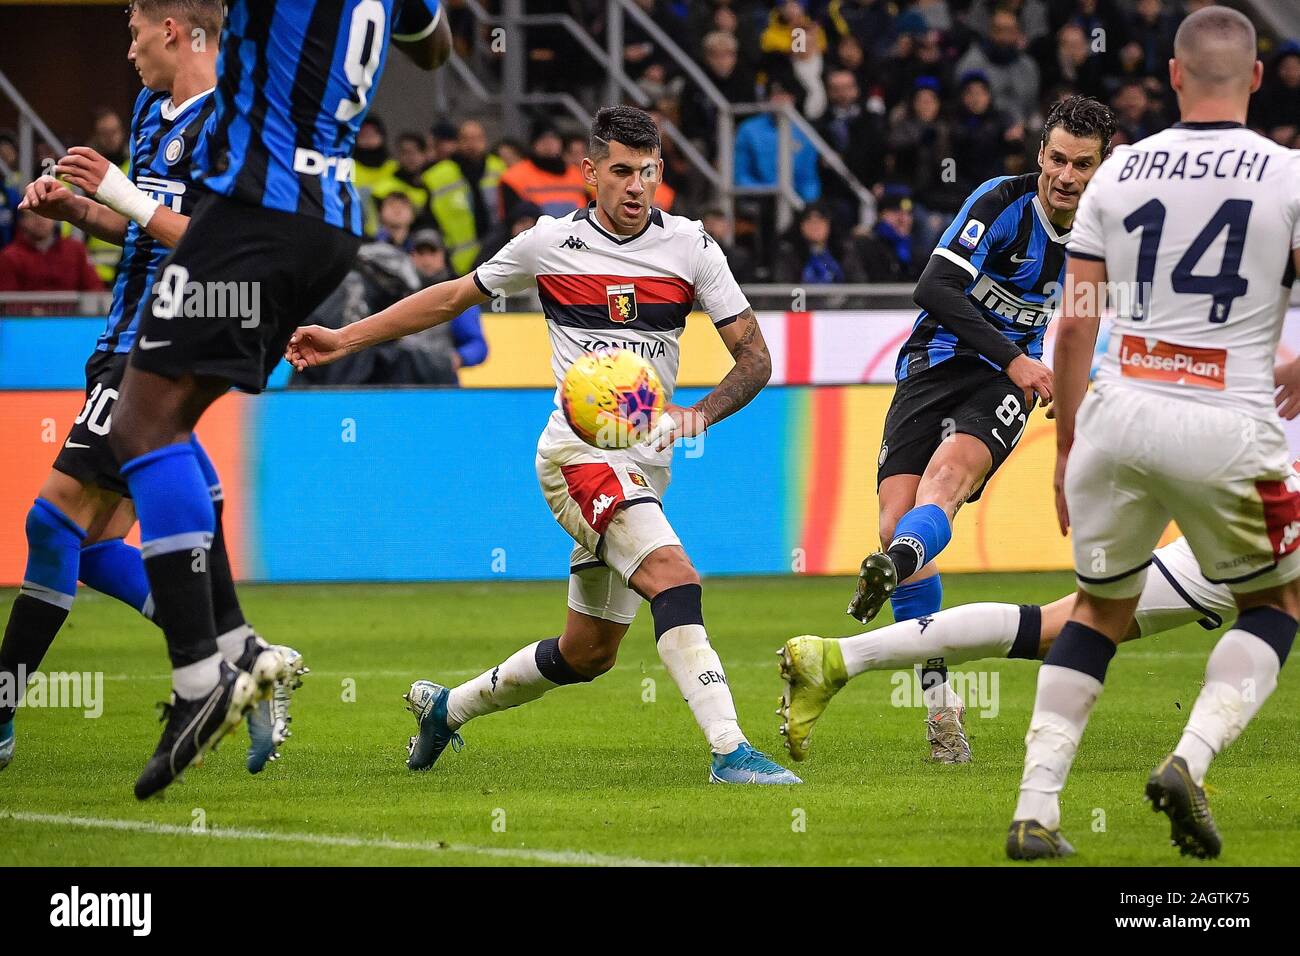 Milan, Italy. 21st Dec, 2019. Stefano Sensi of FC Internazionale during the  Serie A match between Inter Milan and Genoa at Stadio San Siro, Milan,  Italy on 21 December 2019. Photo by